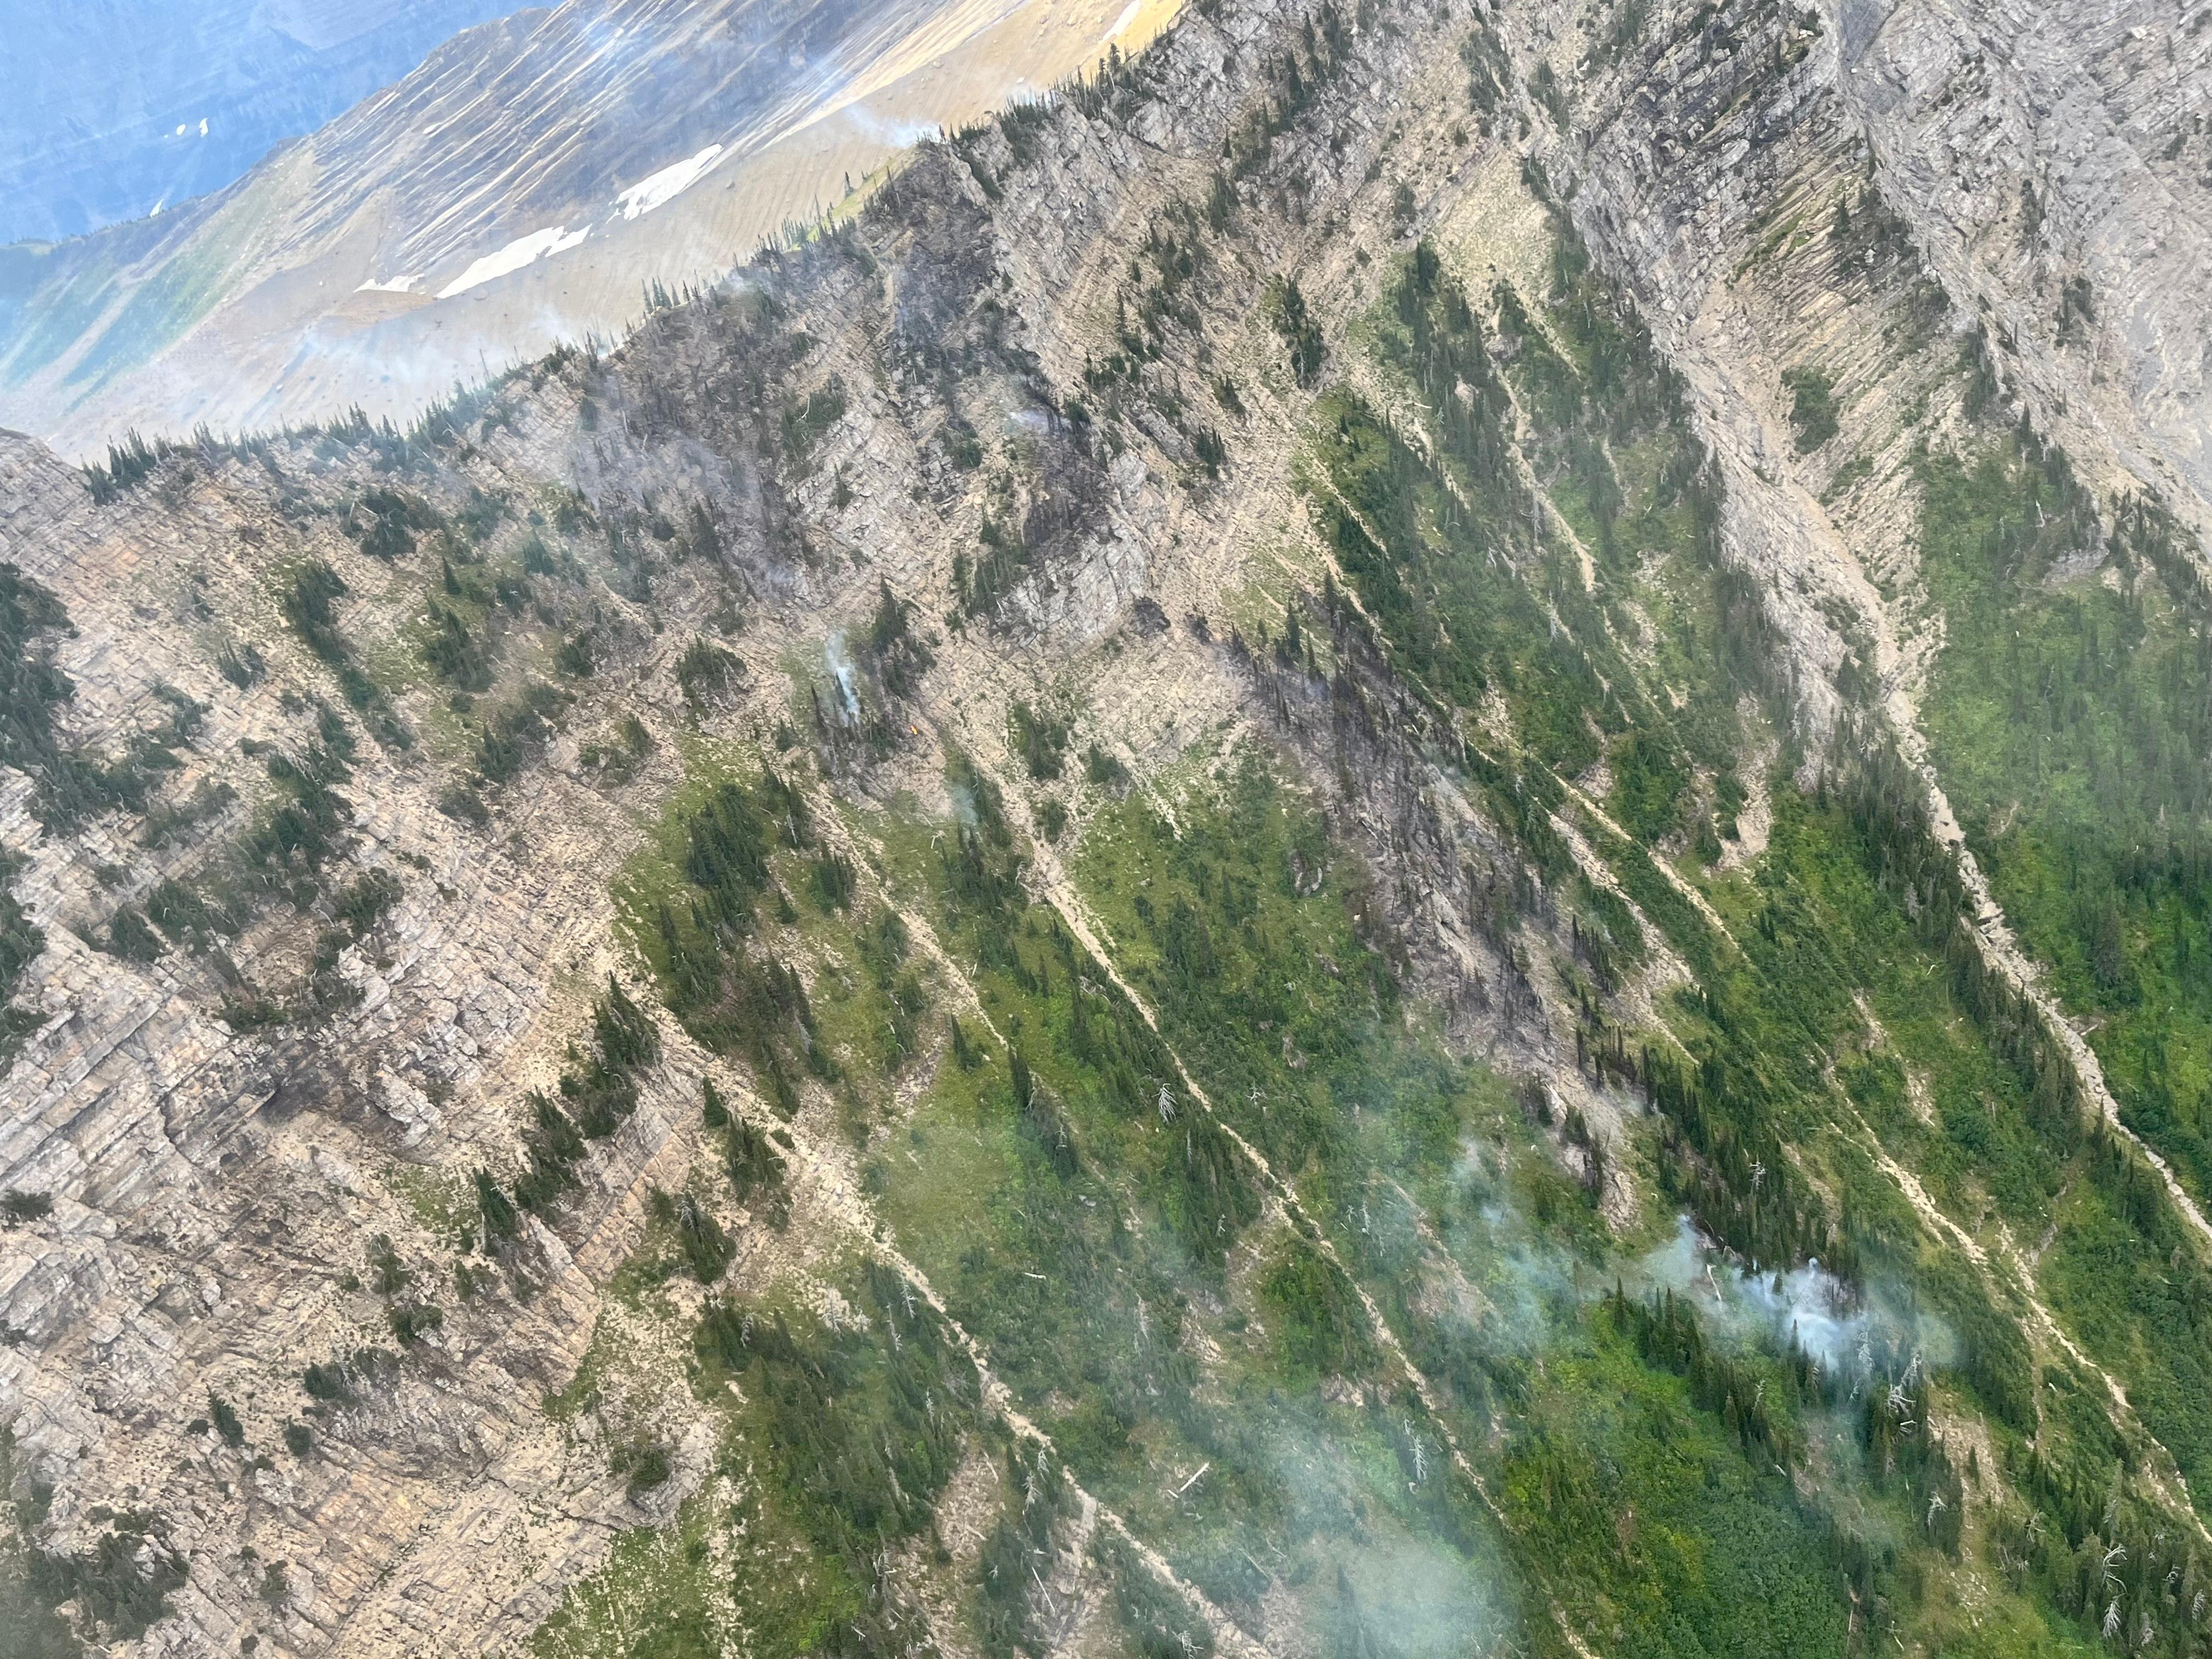 A photo of steep, rocky slopes with more vegetation below, where smoke rises from multiple clumps of trees.